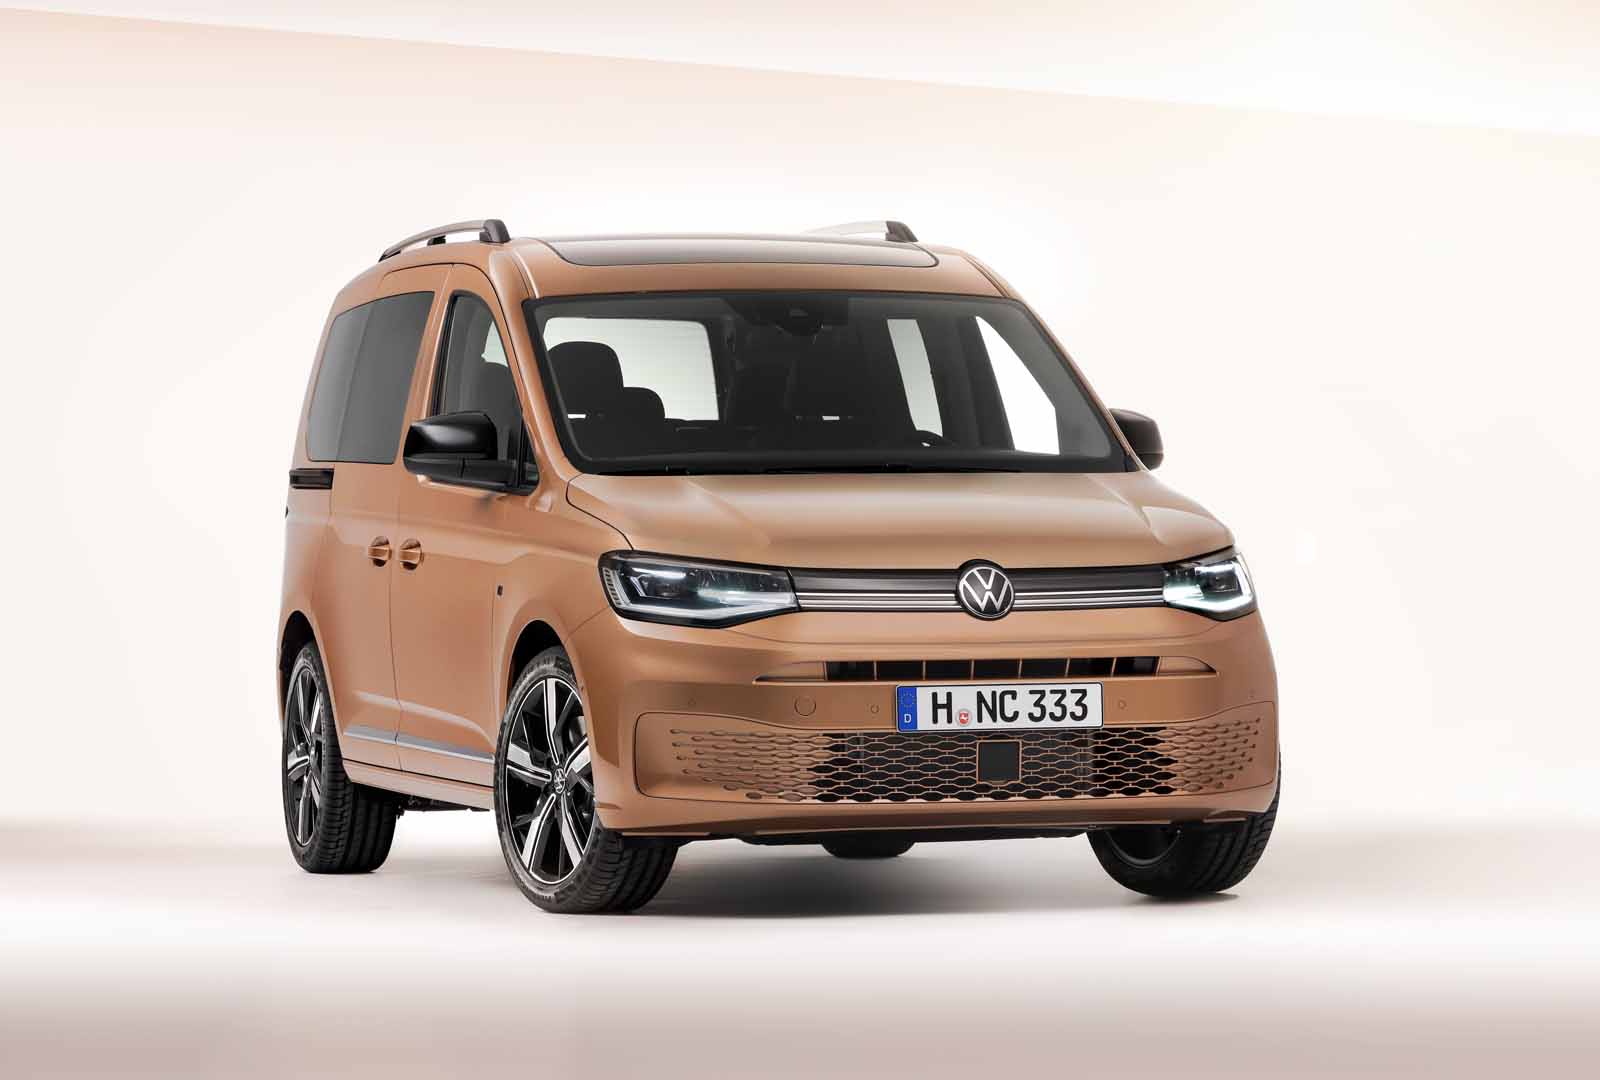 vw caddy lease offers